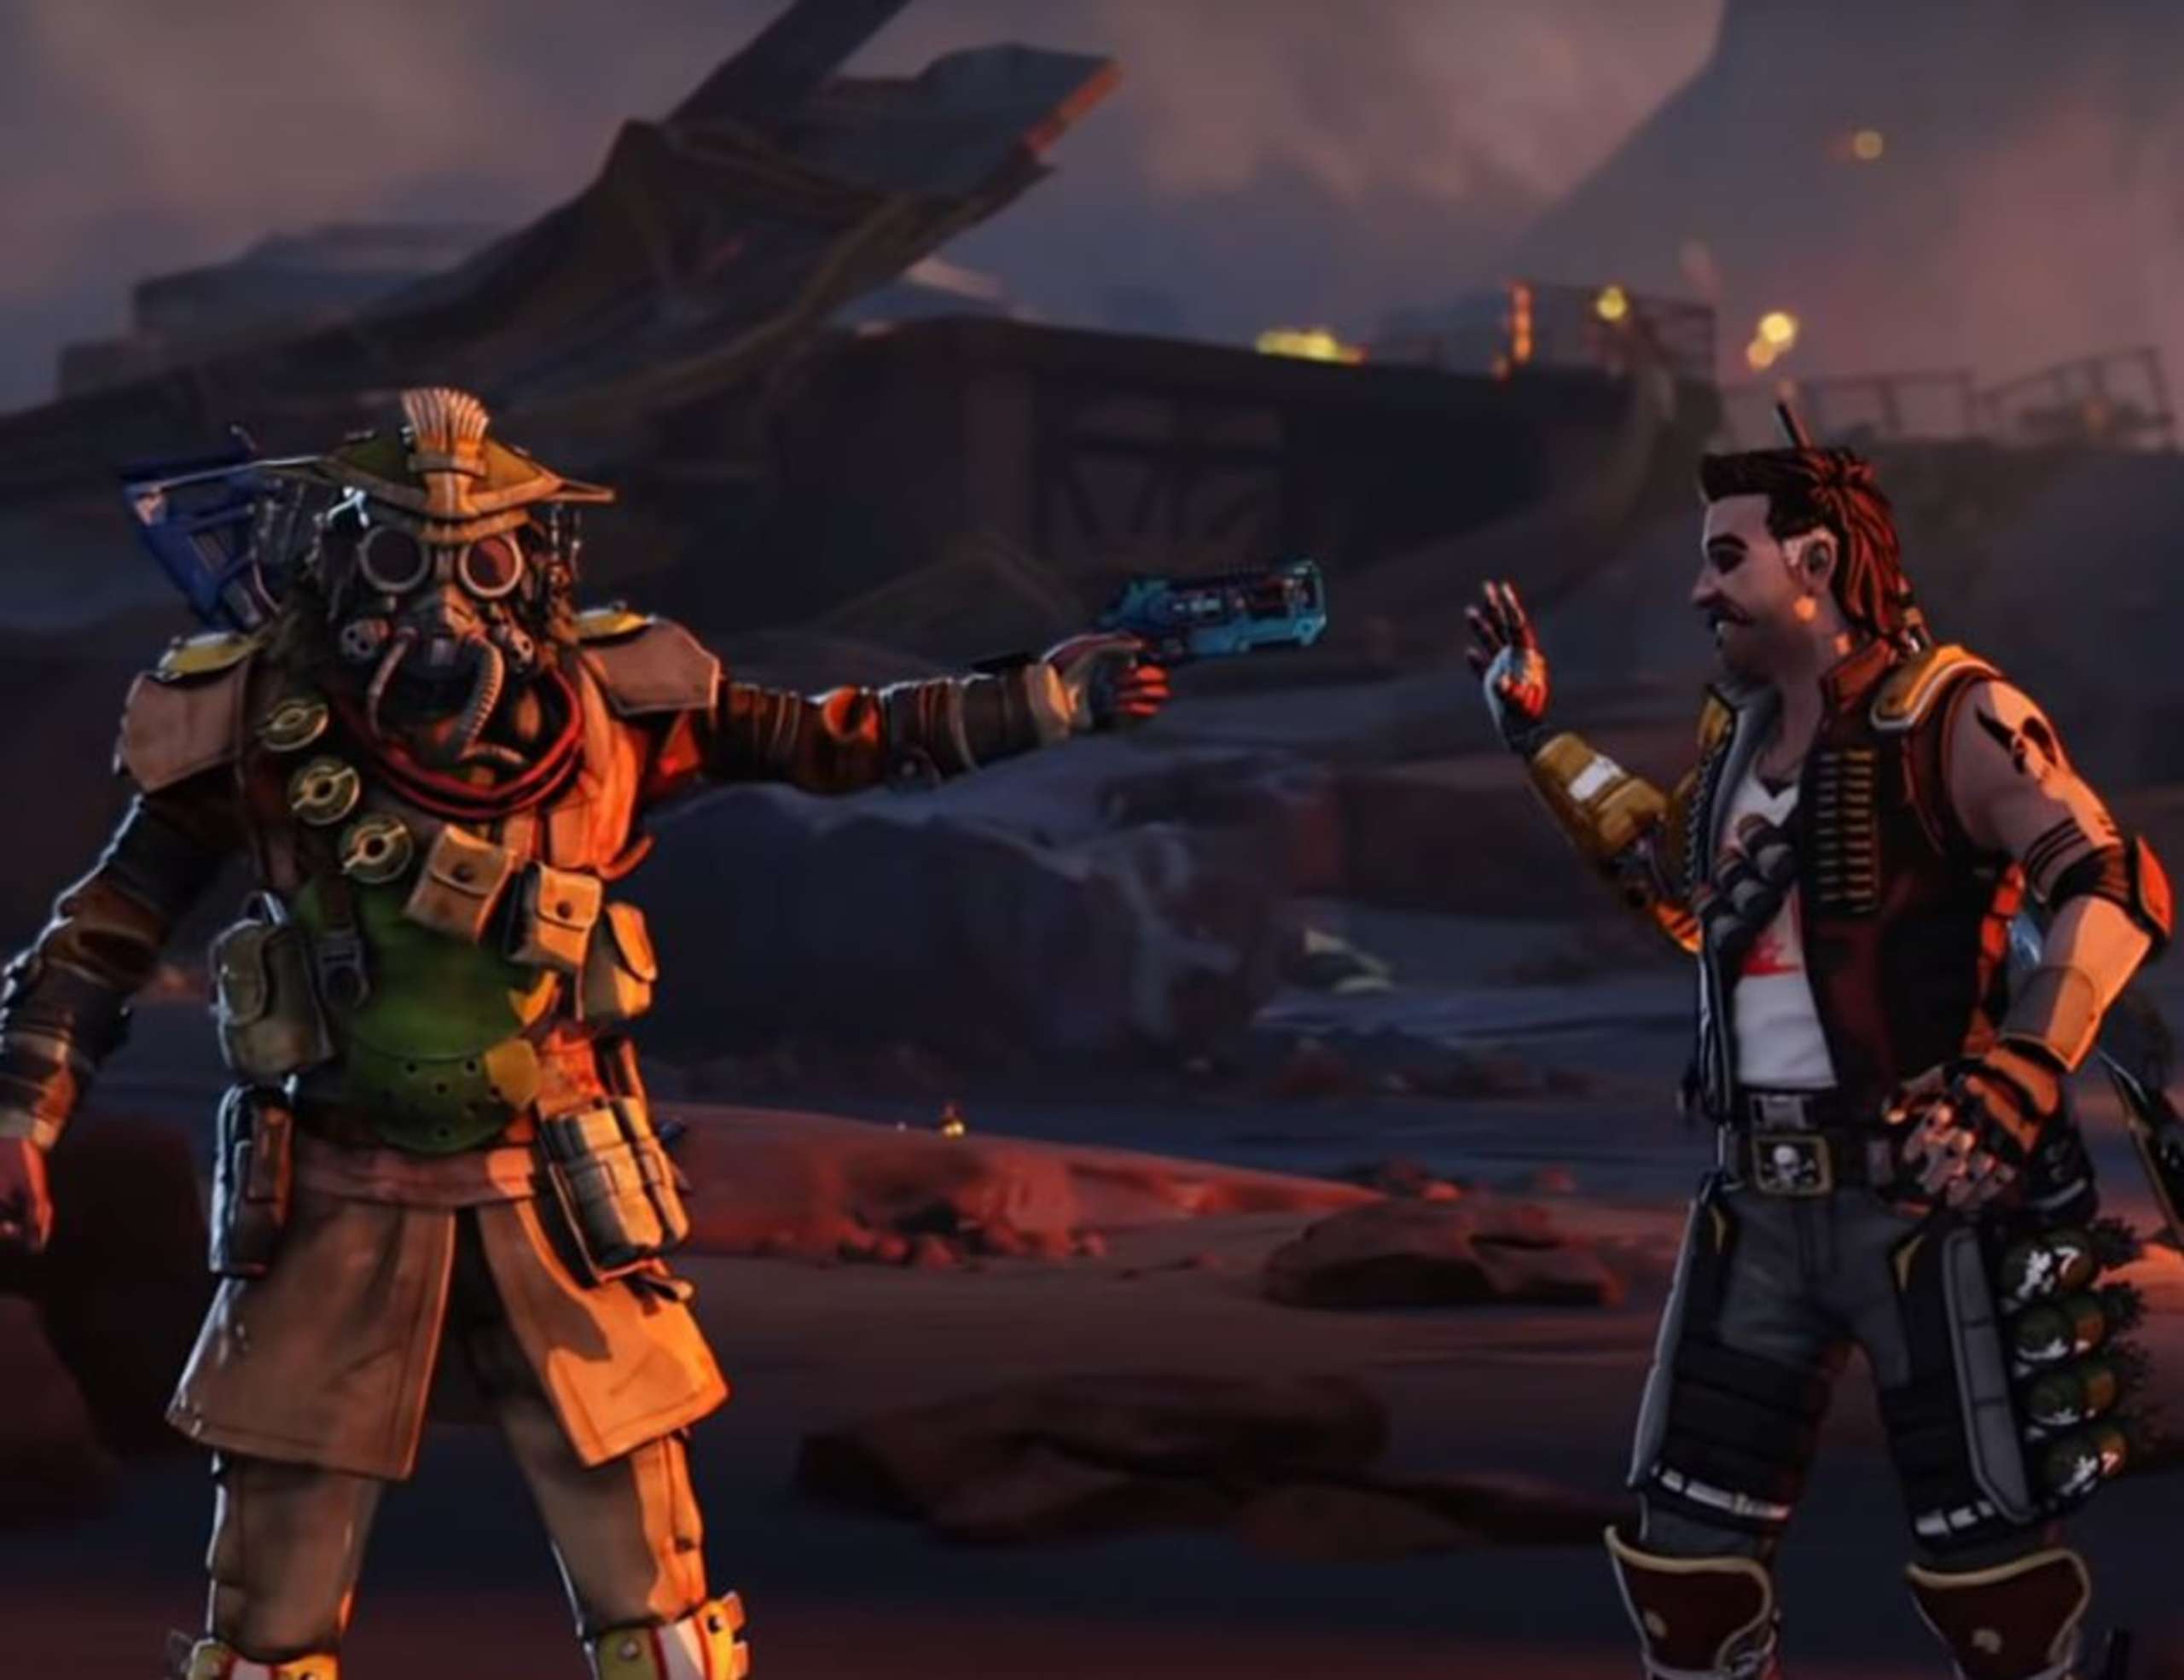 The Developers Of Apex Legends, Respawn Entertainment, Have Published A Video To Address A Fan’s Inquiry Into The History Of The Characters Fuse And Bloodhound